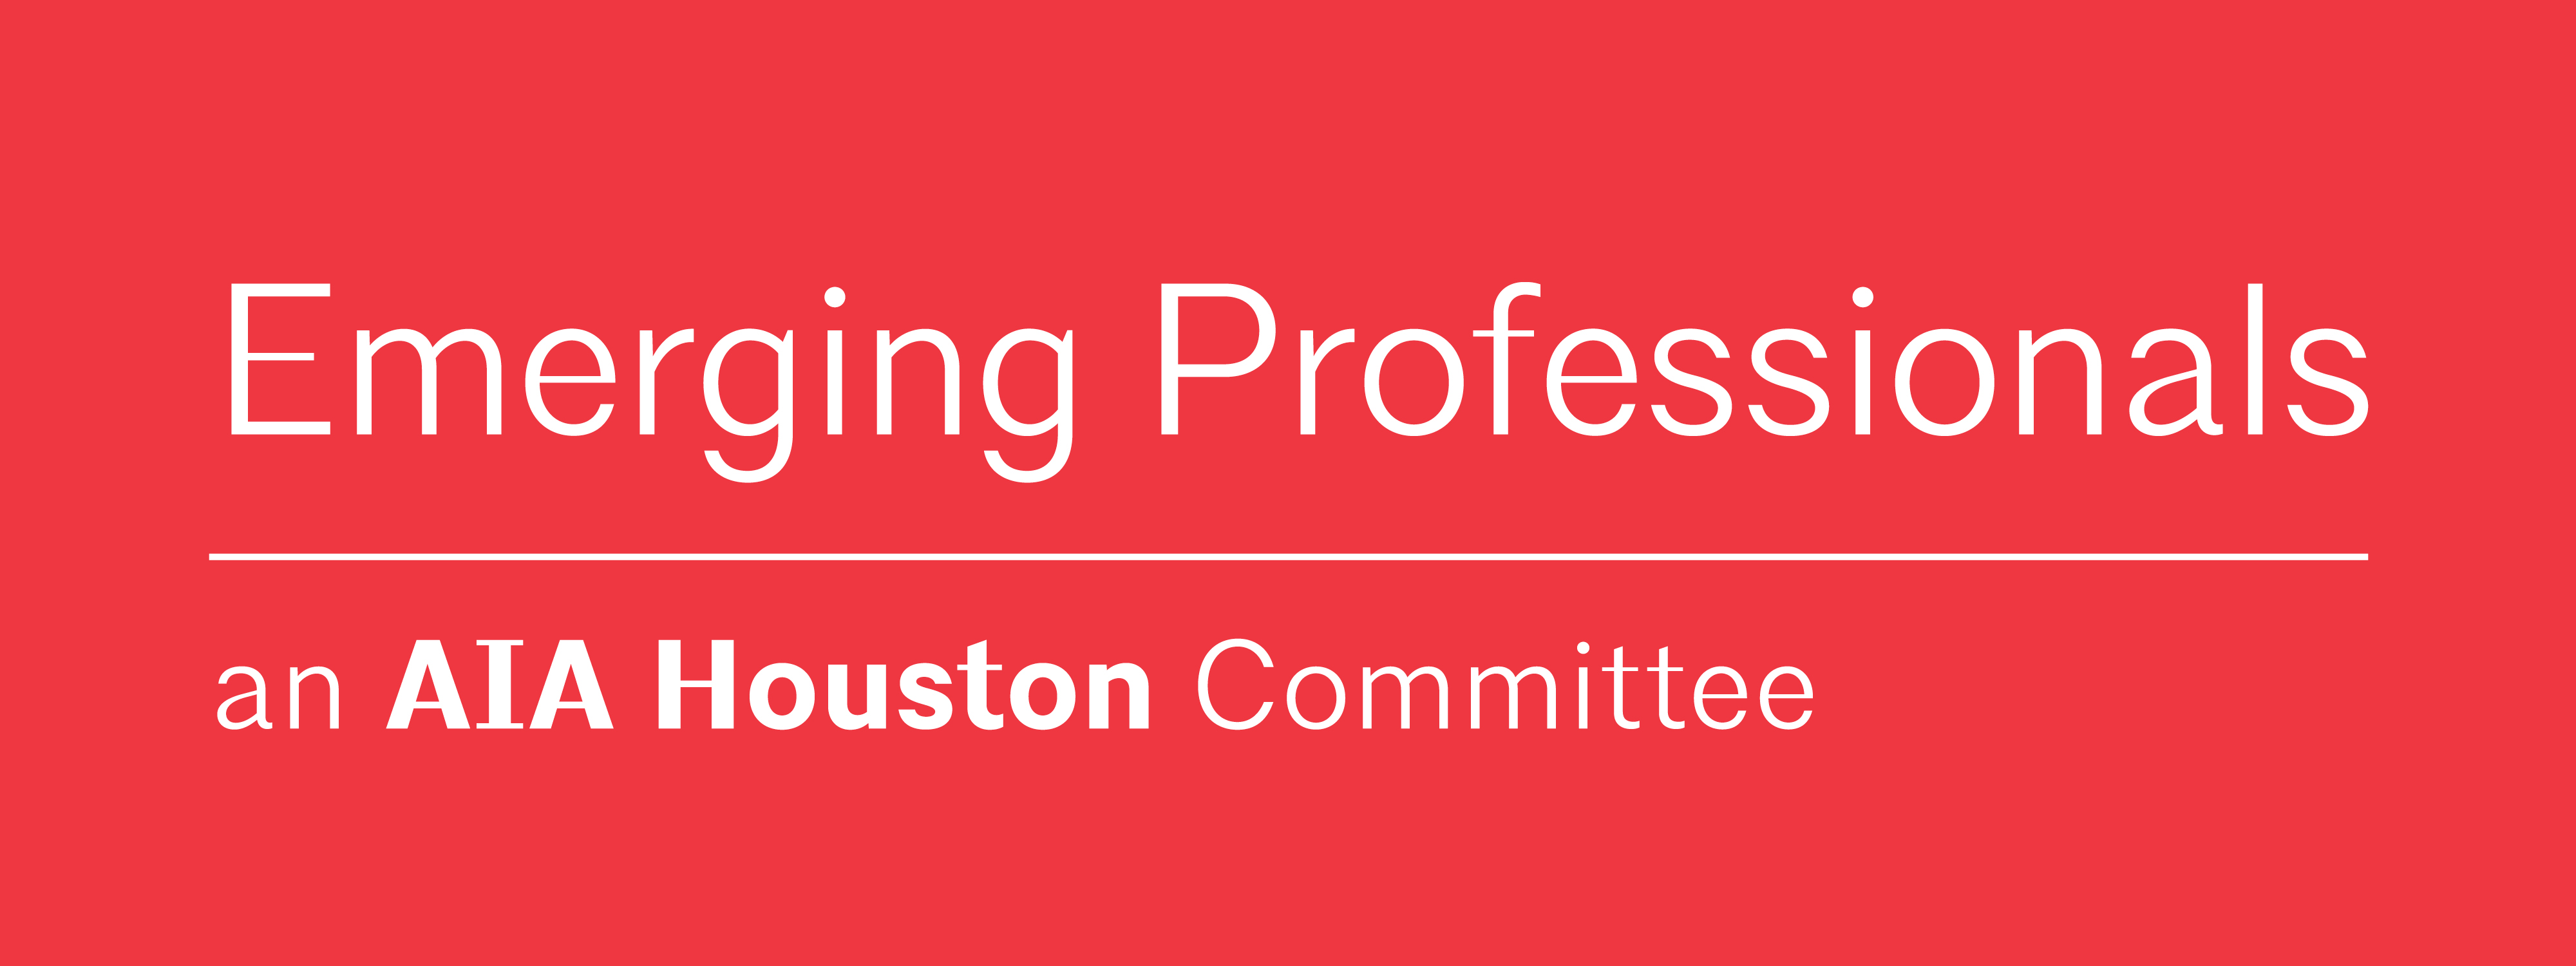 Emerging Professionals Committee